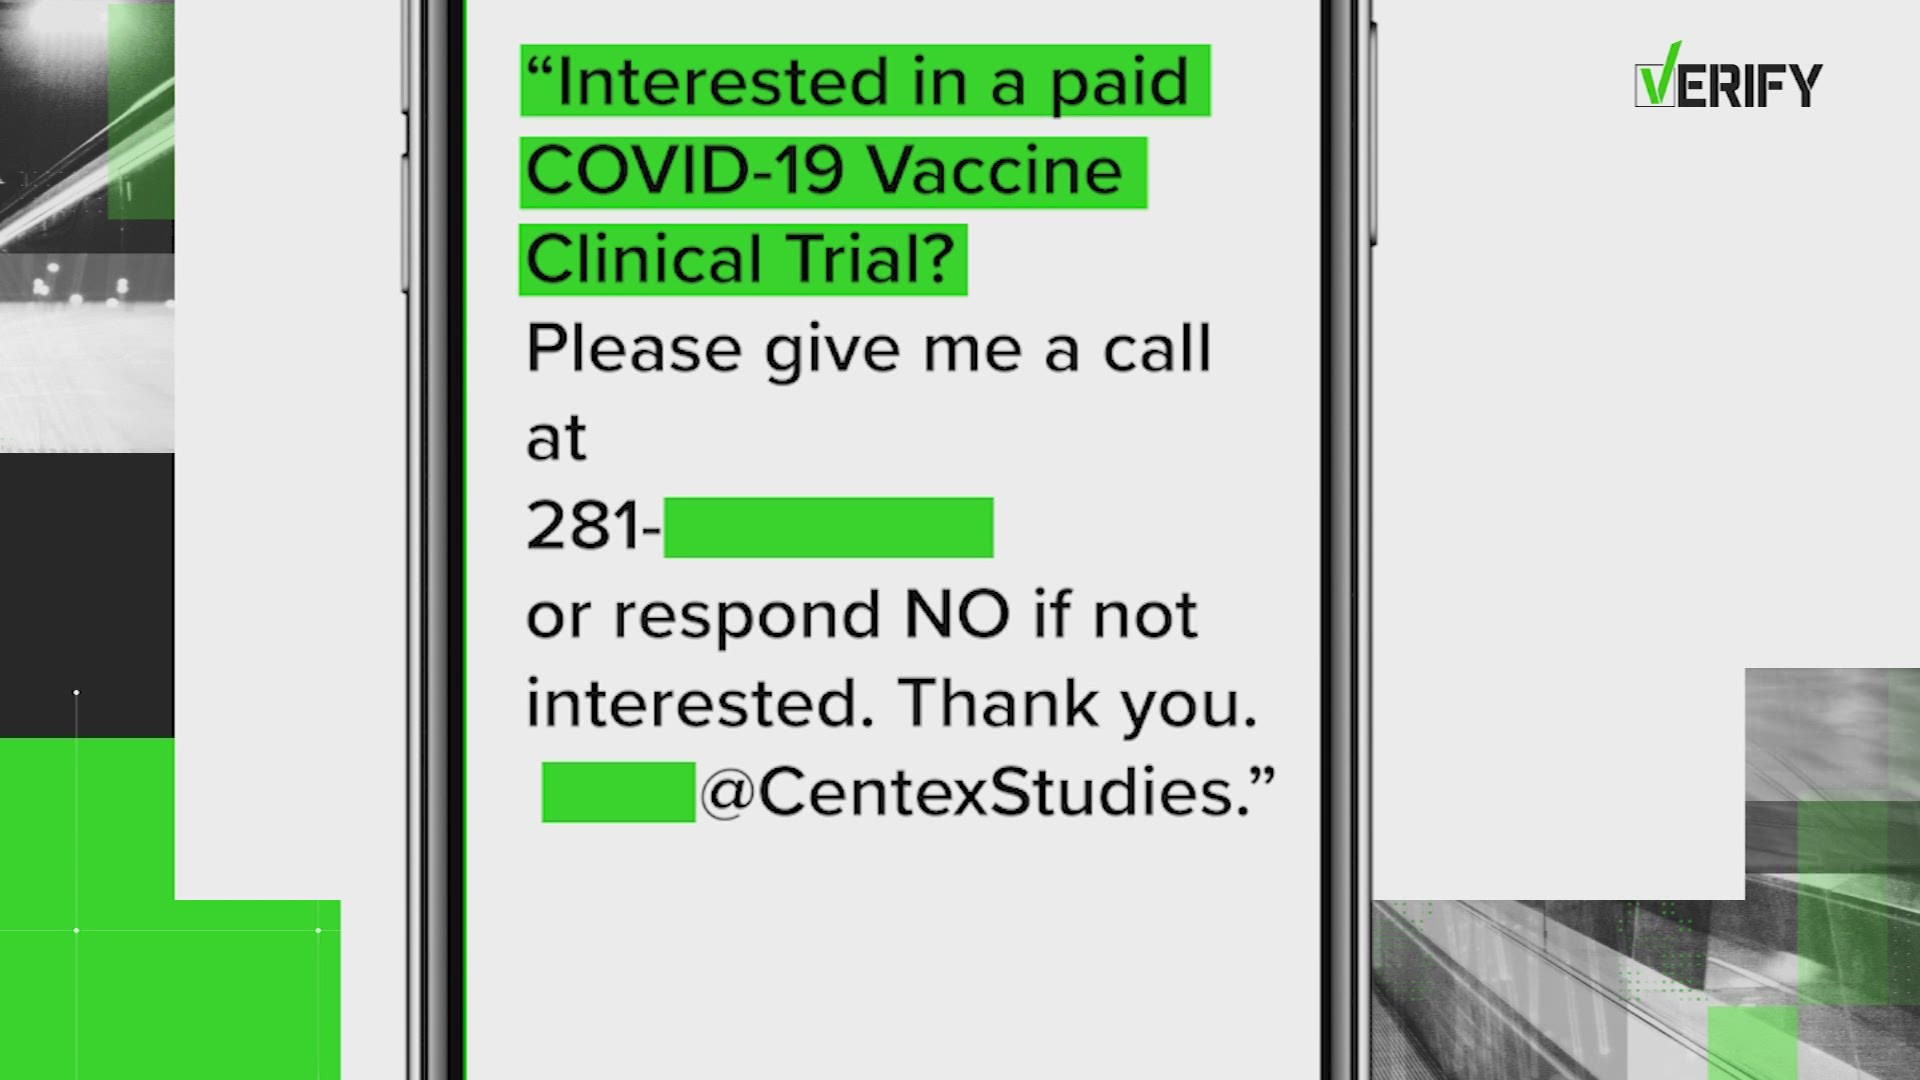 The text reads, “Interested in a paid COVID-19 vaccine clinical trial?” There’s a telephone number and email to contact someone at Centex Studies.